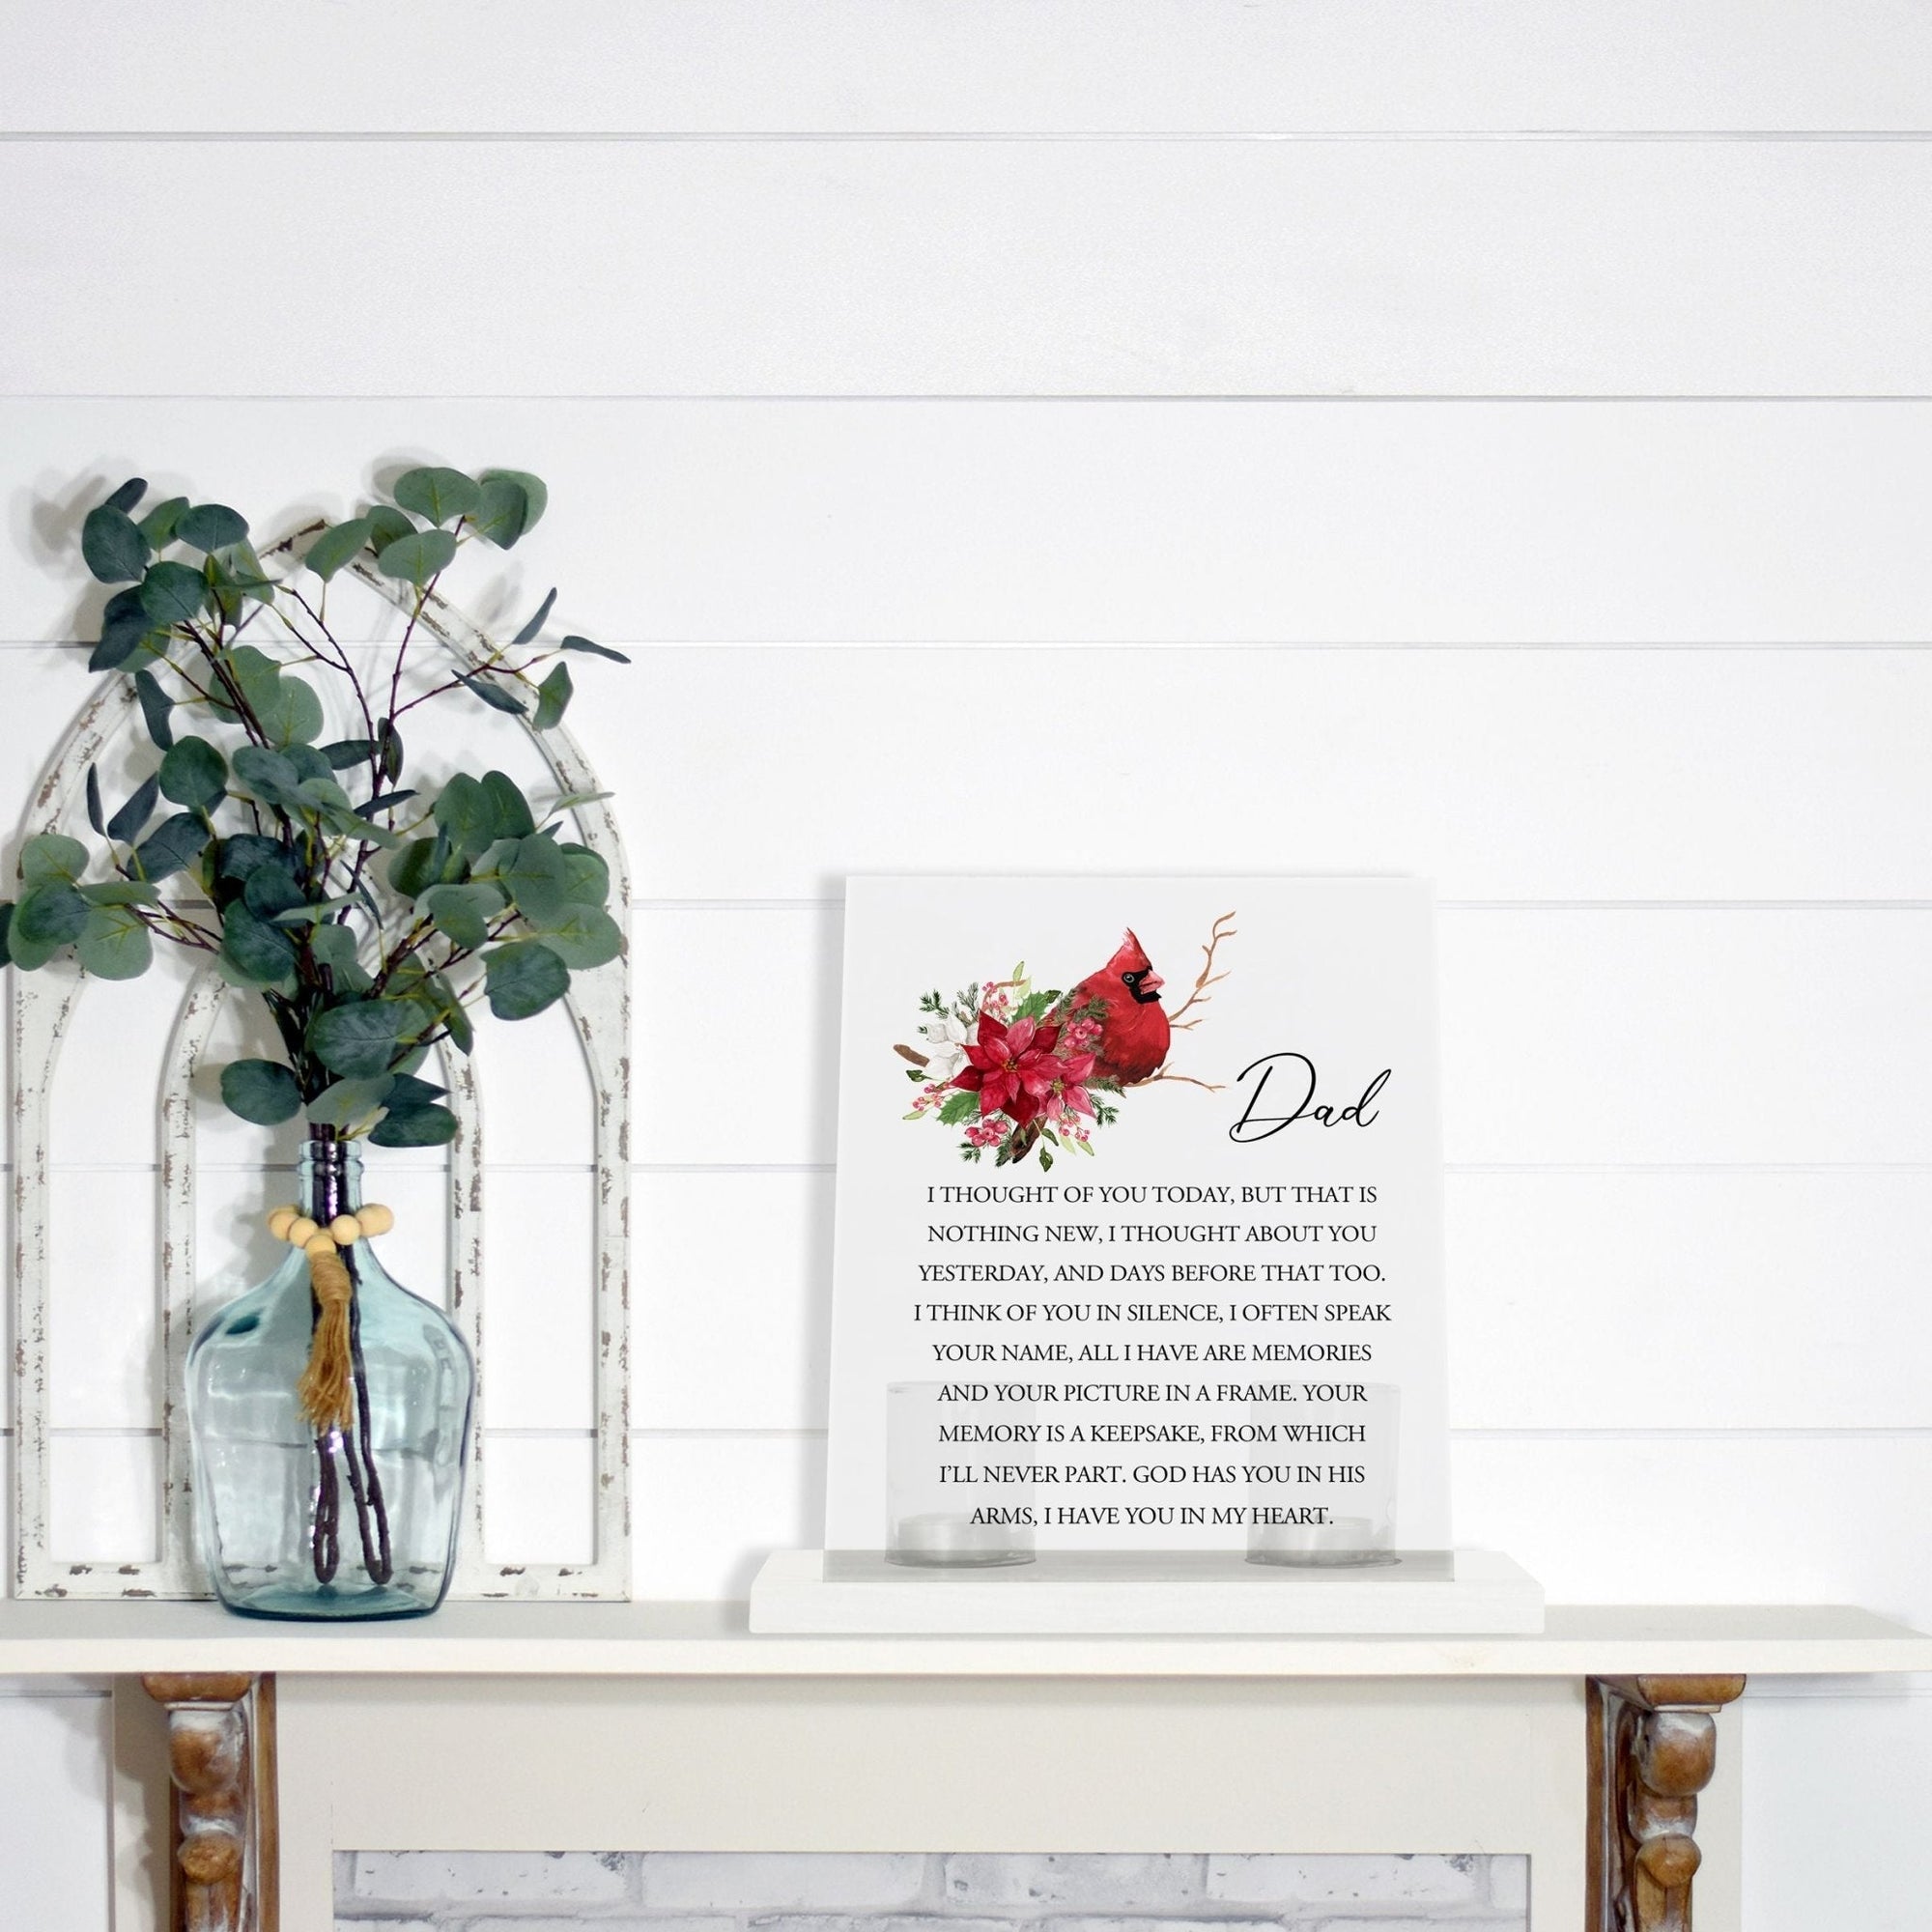 A solemn memorial display featuring a Lifesong Milestones Cardinal Memorial Frosted Acrylic Sign with Base and Votive Candle Holder. The tealight candle holder provides a warm glow, while votive candles surround it, creating a touching memory.